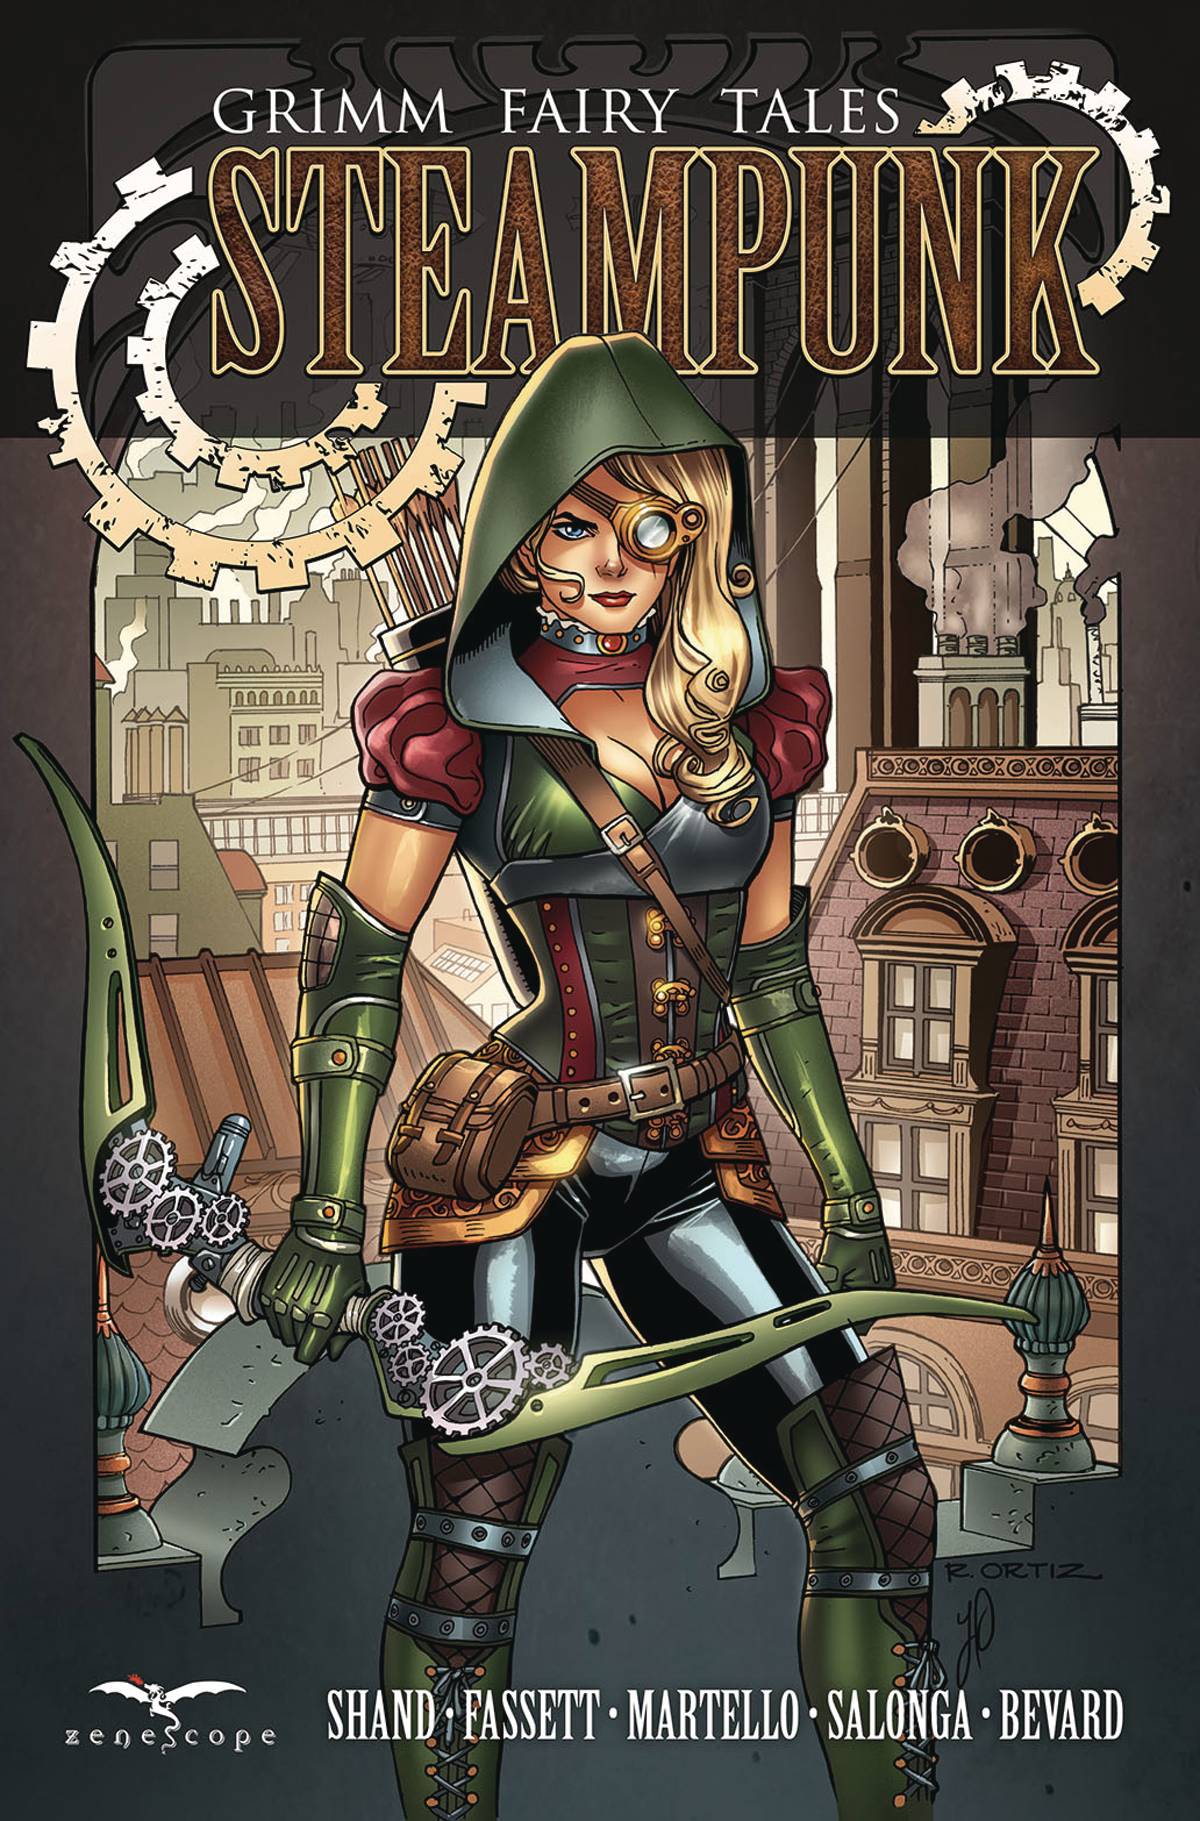 Grimm Fairy Tales Steampunk Graphic Novel